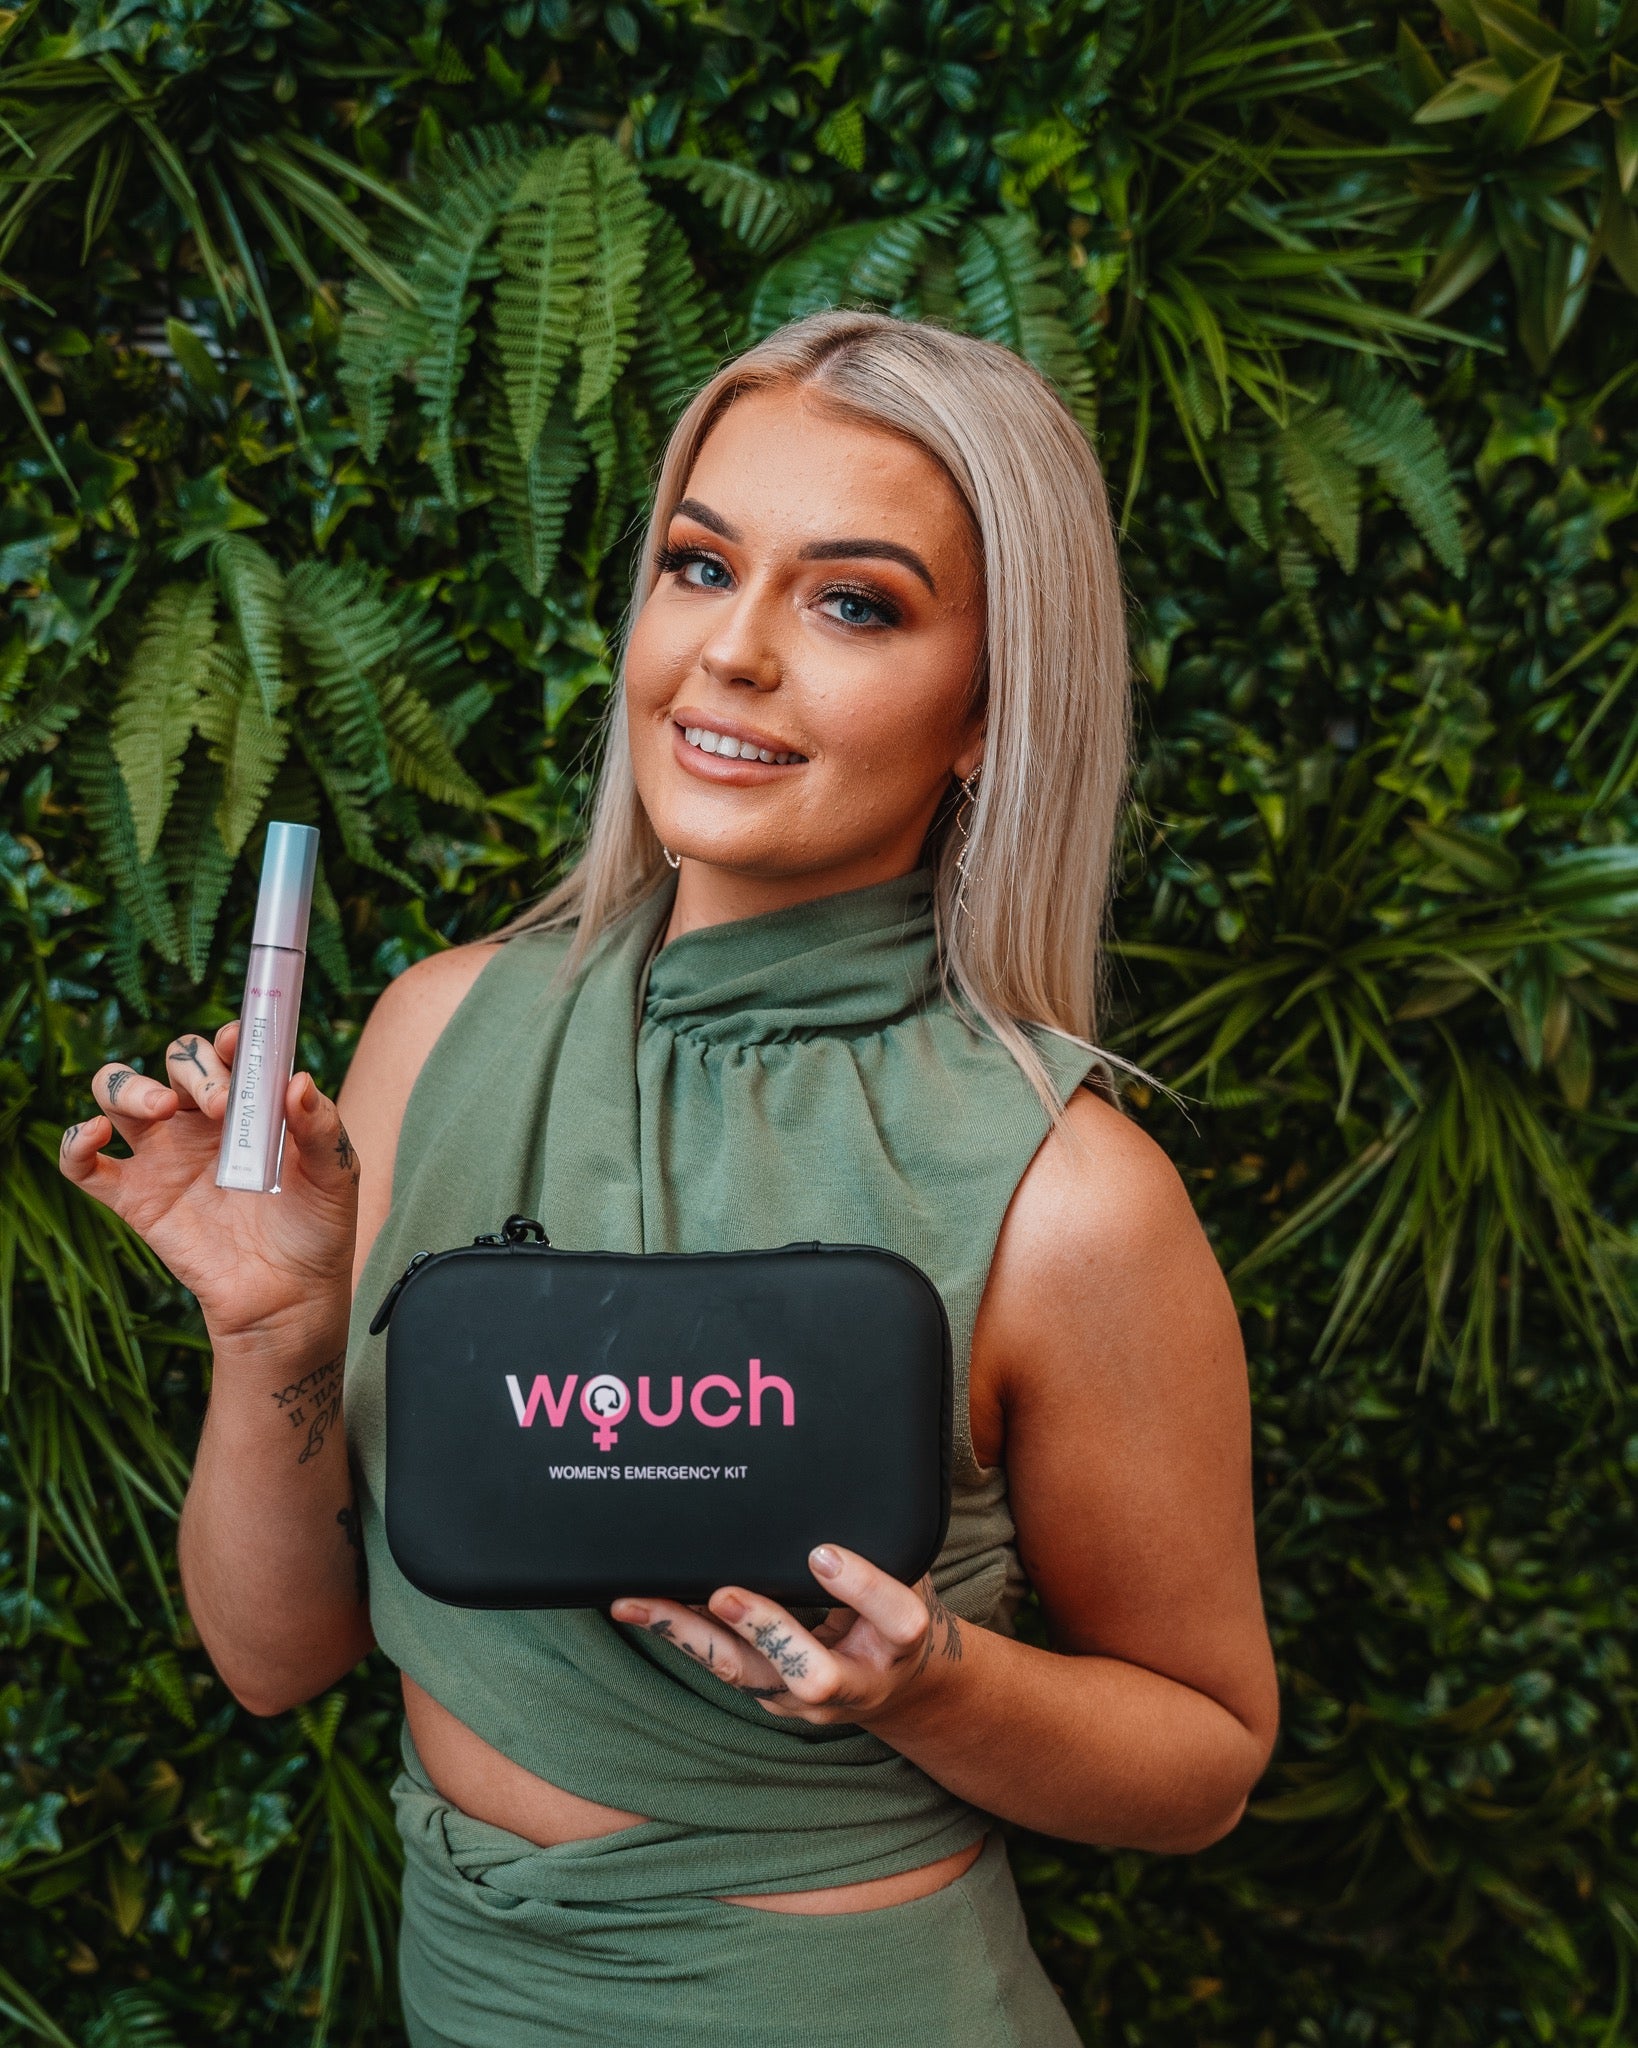 Wouch Kit – Wouch official